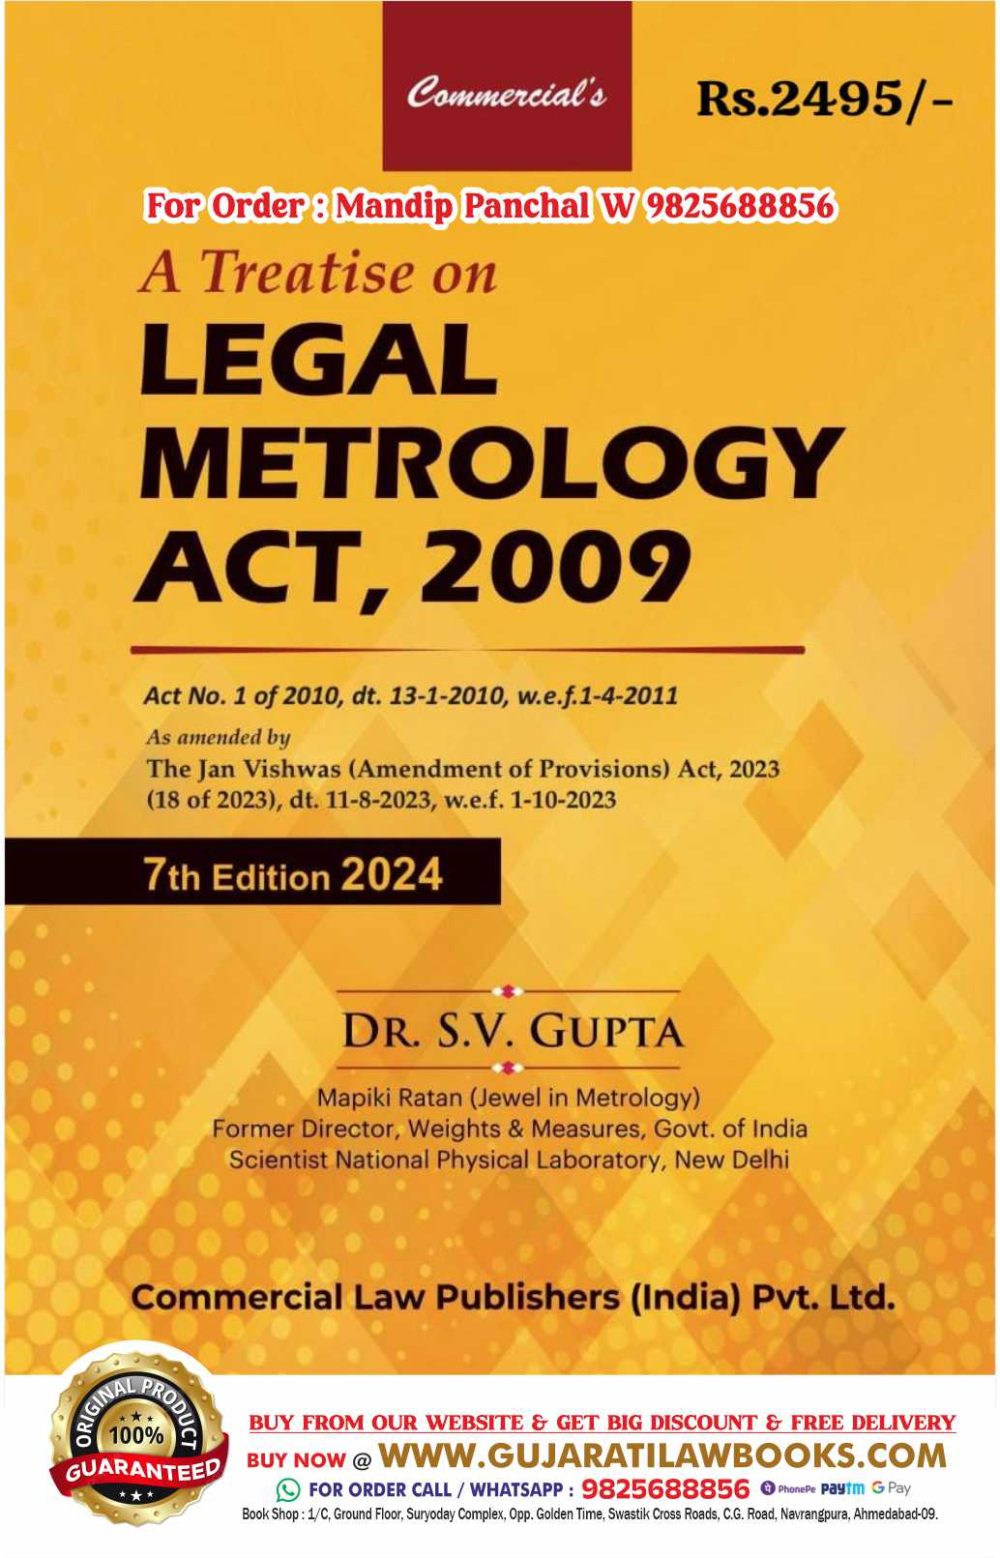 A Treatise on LEGAL METROLOGY ACT, 2009 - Latest 7th Edition March 2024 Commercial **BUY ORIGINAL BOOKS WITH US***